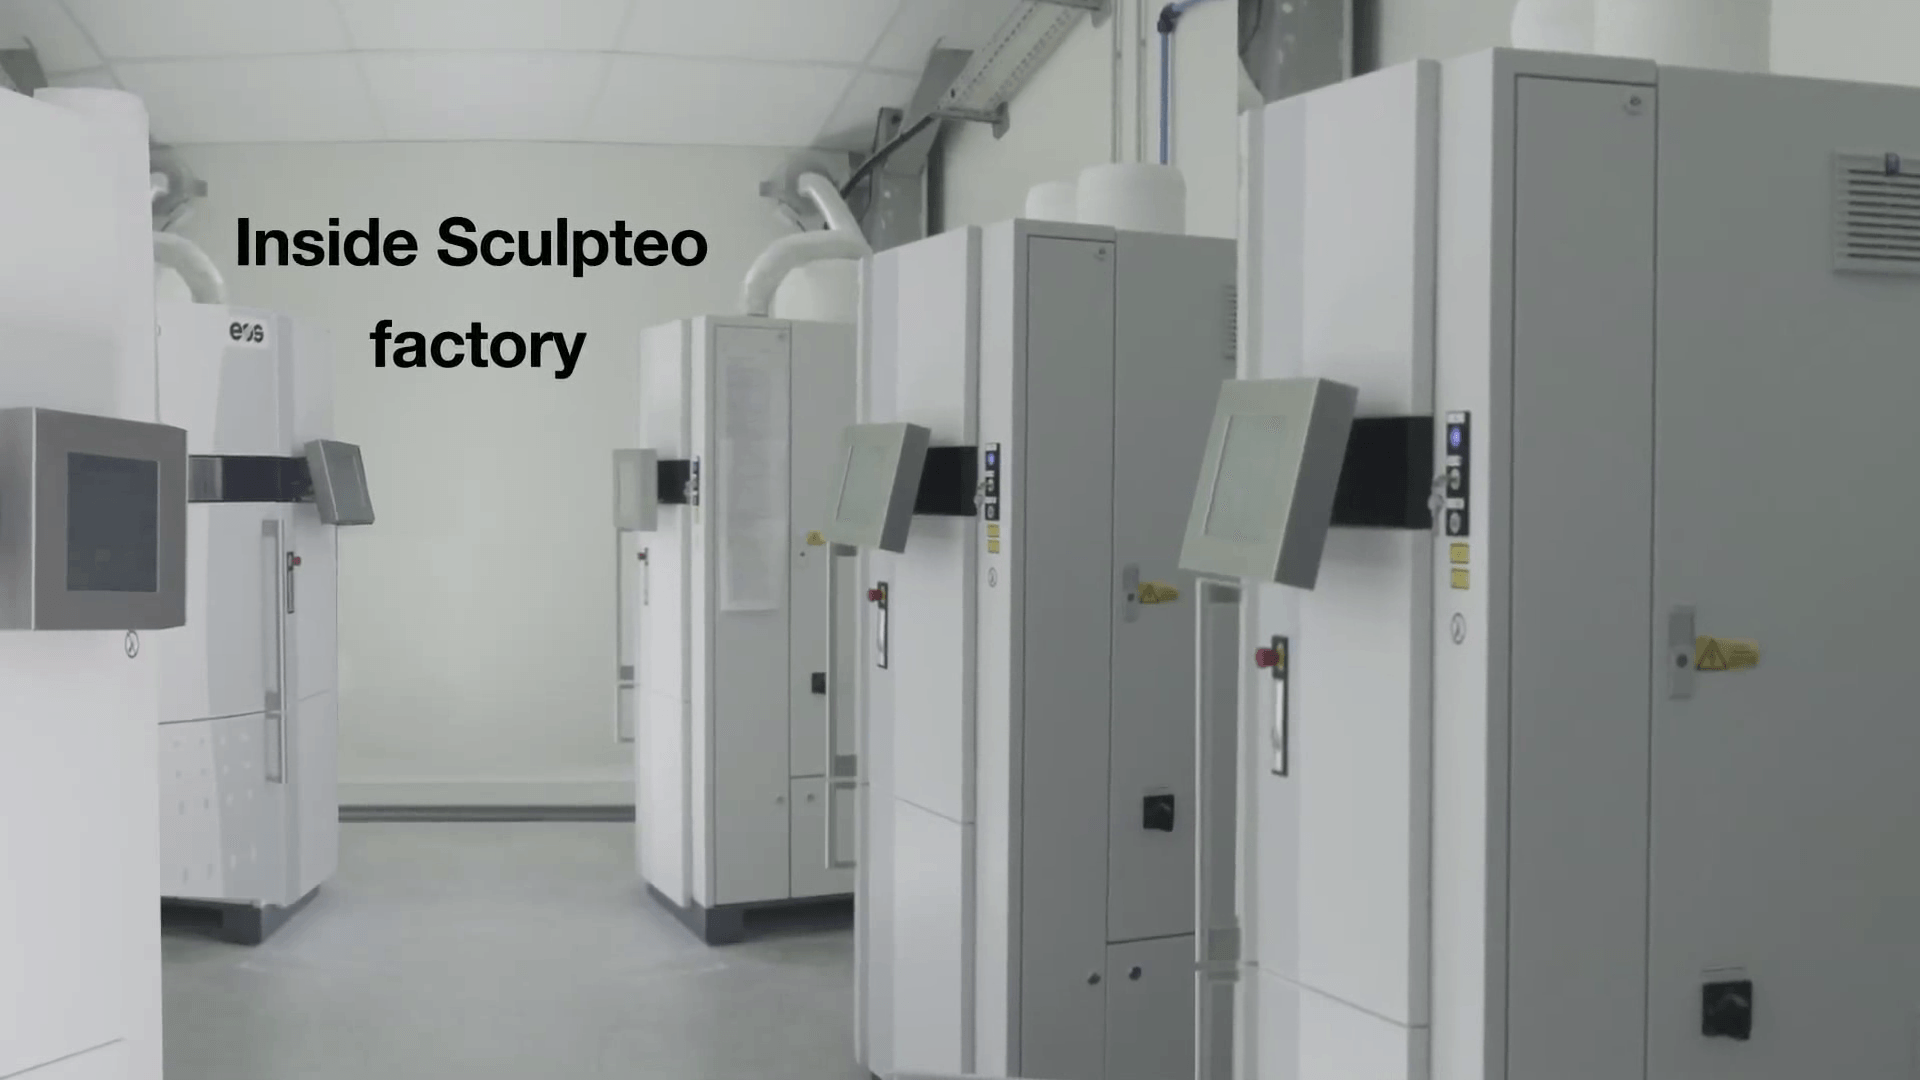 New European Factory for faster turnaround and more efficient production  | Sculpteo Blog